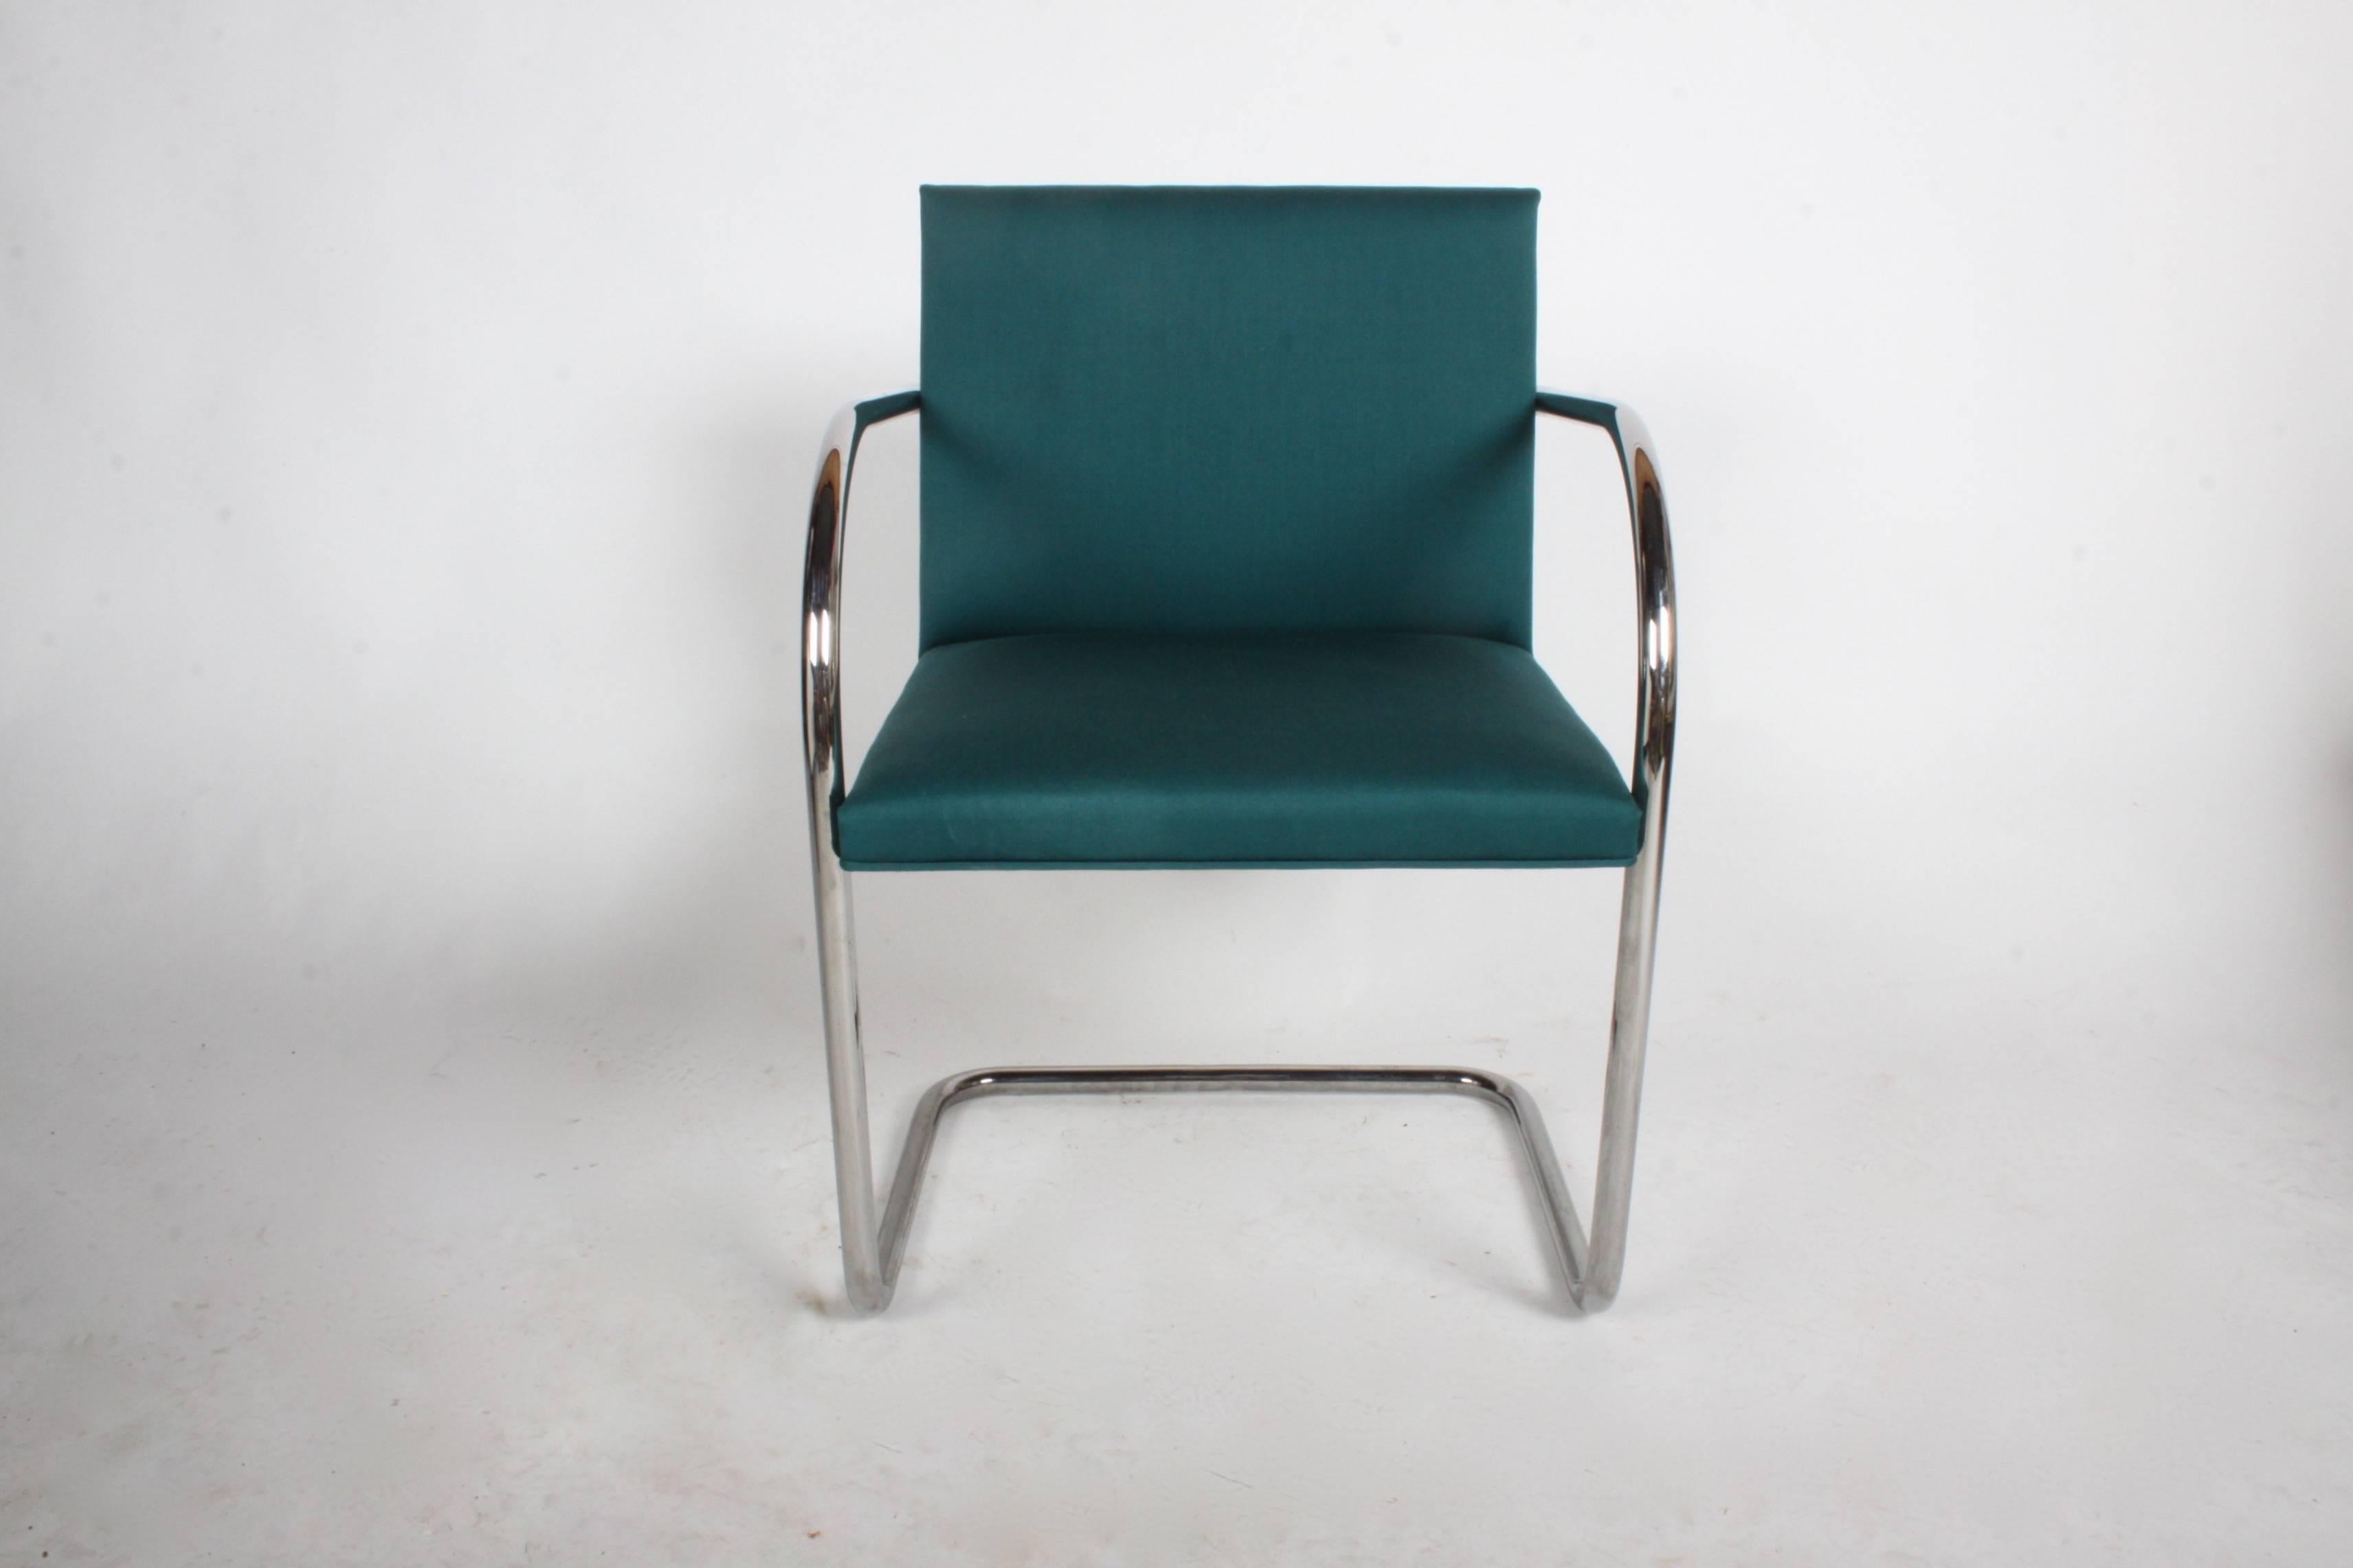 Mies Van Der Rohe for Knoll chrome tubular Brno chairs. Various colors, 2-red, 1-green and 1-purple. Some have acceptable fabric, others have stains, so plan on reupholstery. Chrome is nice condition, retains labels. circa 1991 production. 